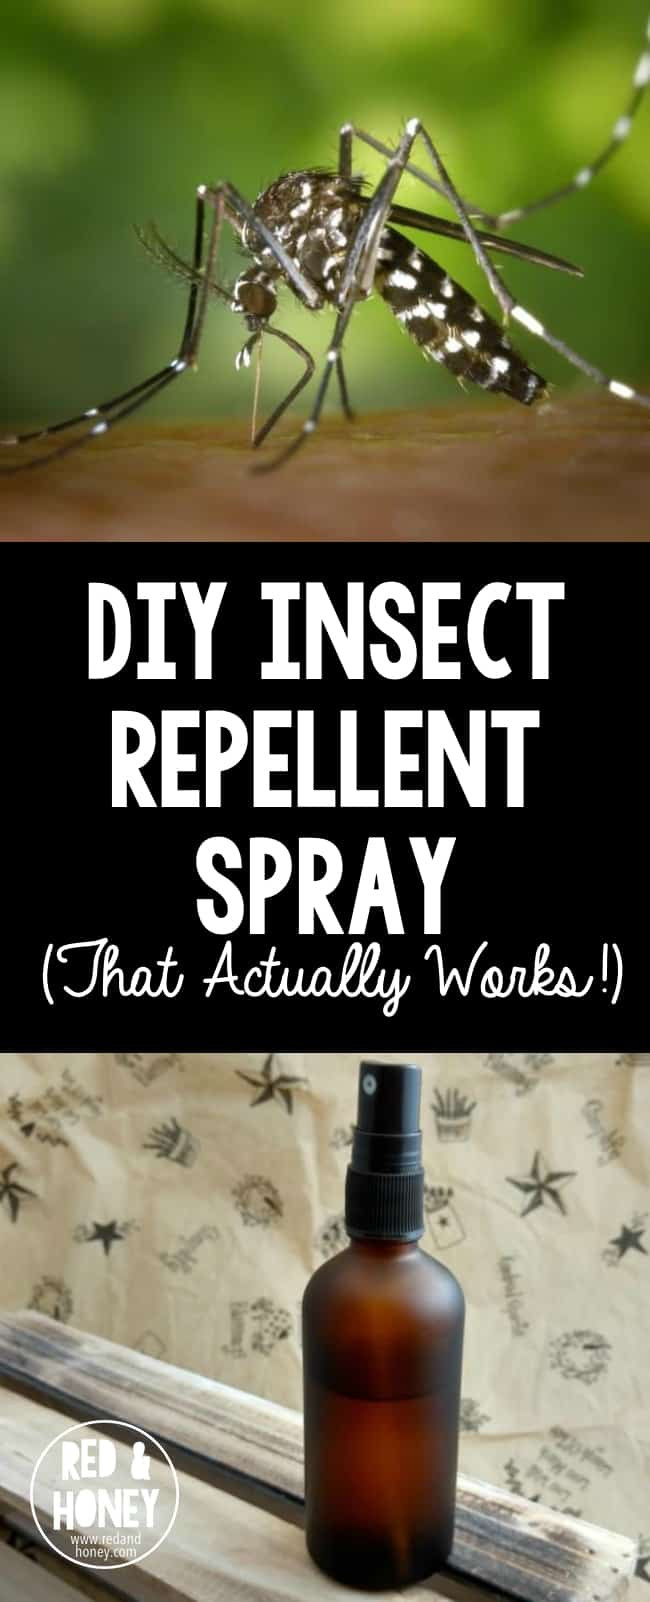 DIY Mosquito Repellent For Dogs
 DIY Insect Repellent Spray with Essential Oils That